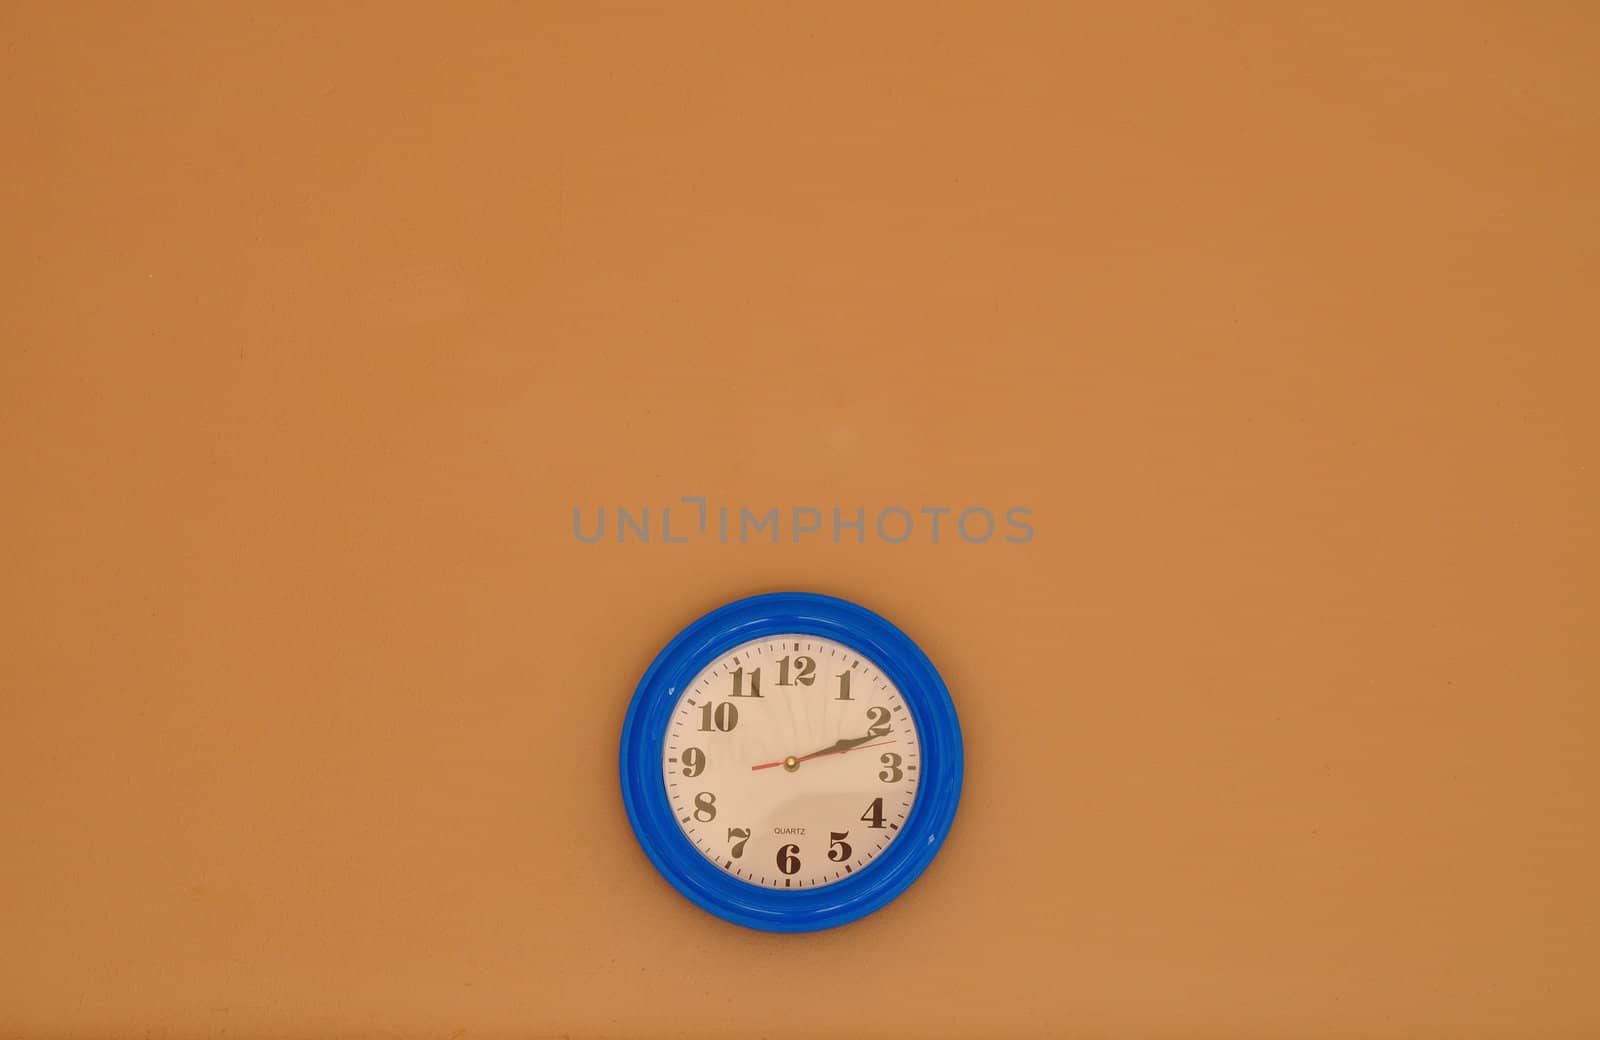 Blueand White Clock or Watch on brown cement wall







Blue and White Clock on brown Wall